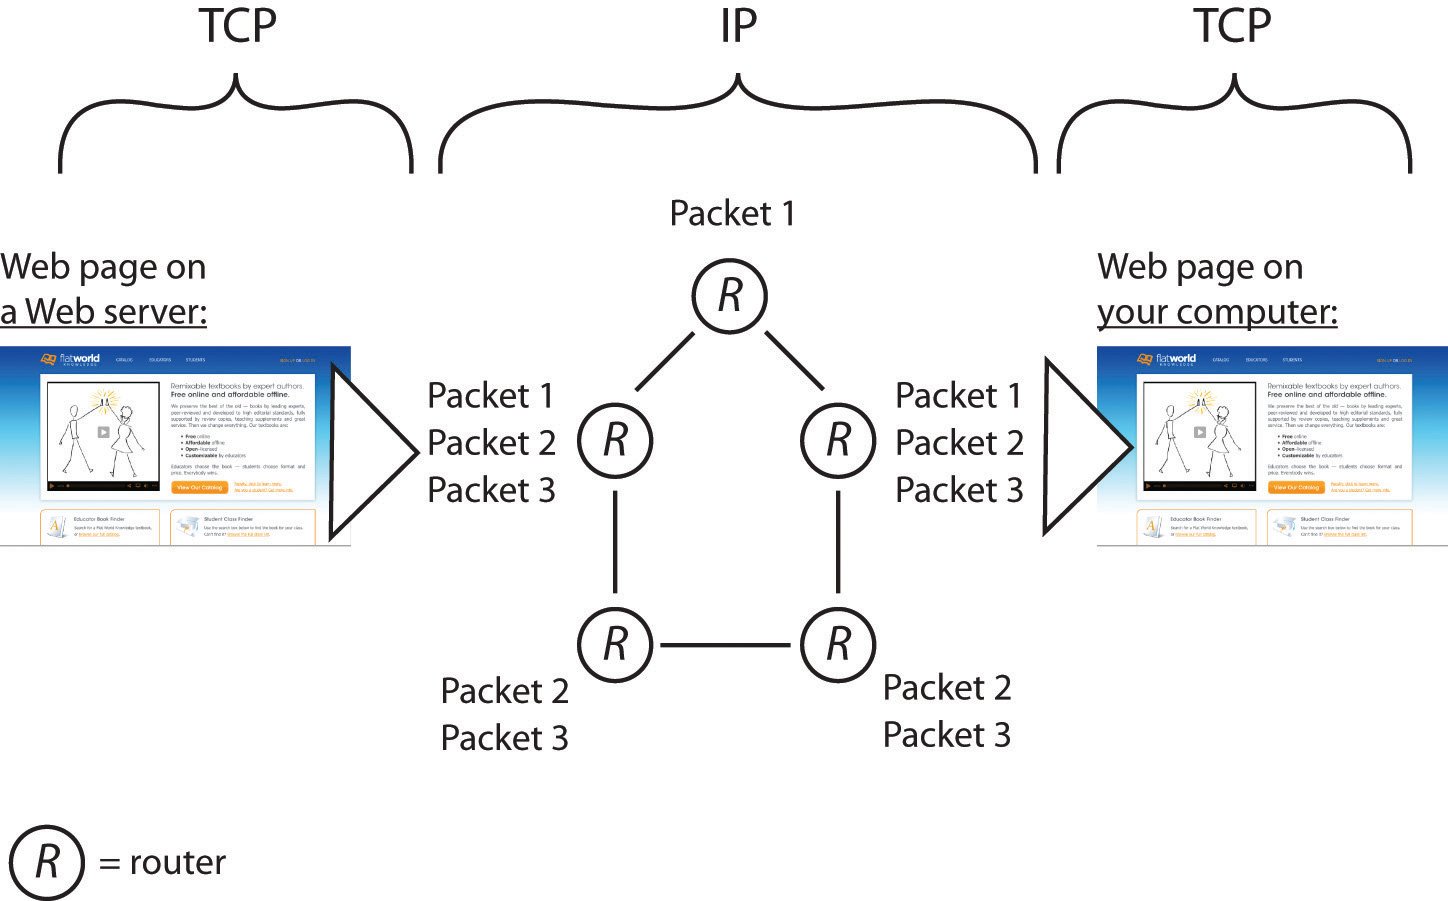 How TCP IP works